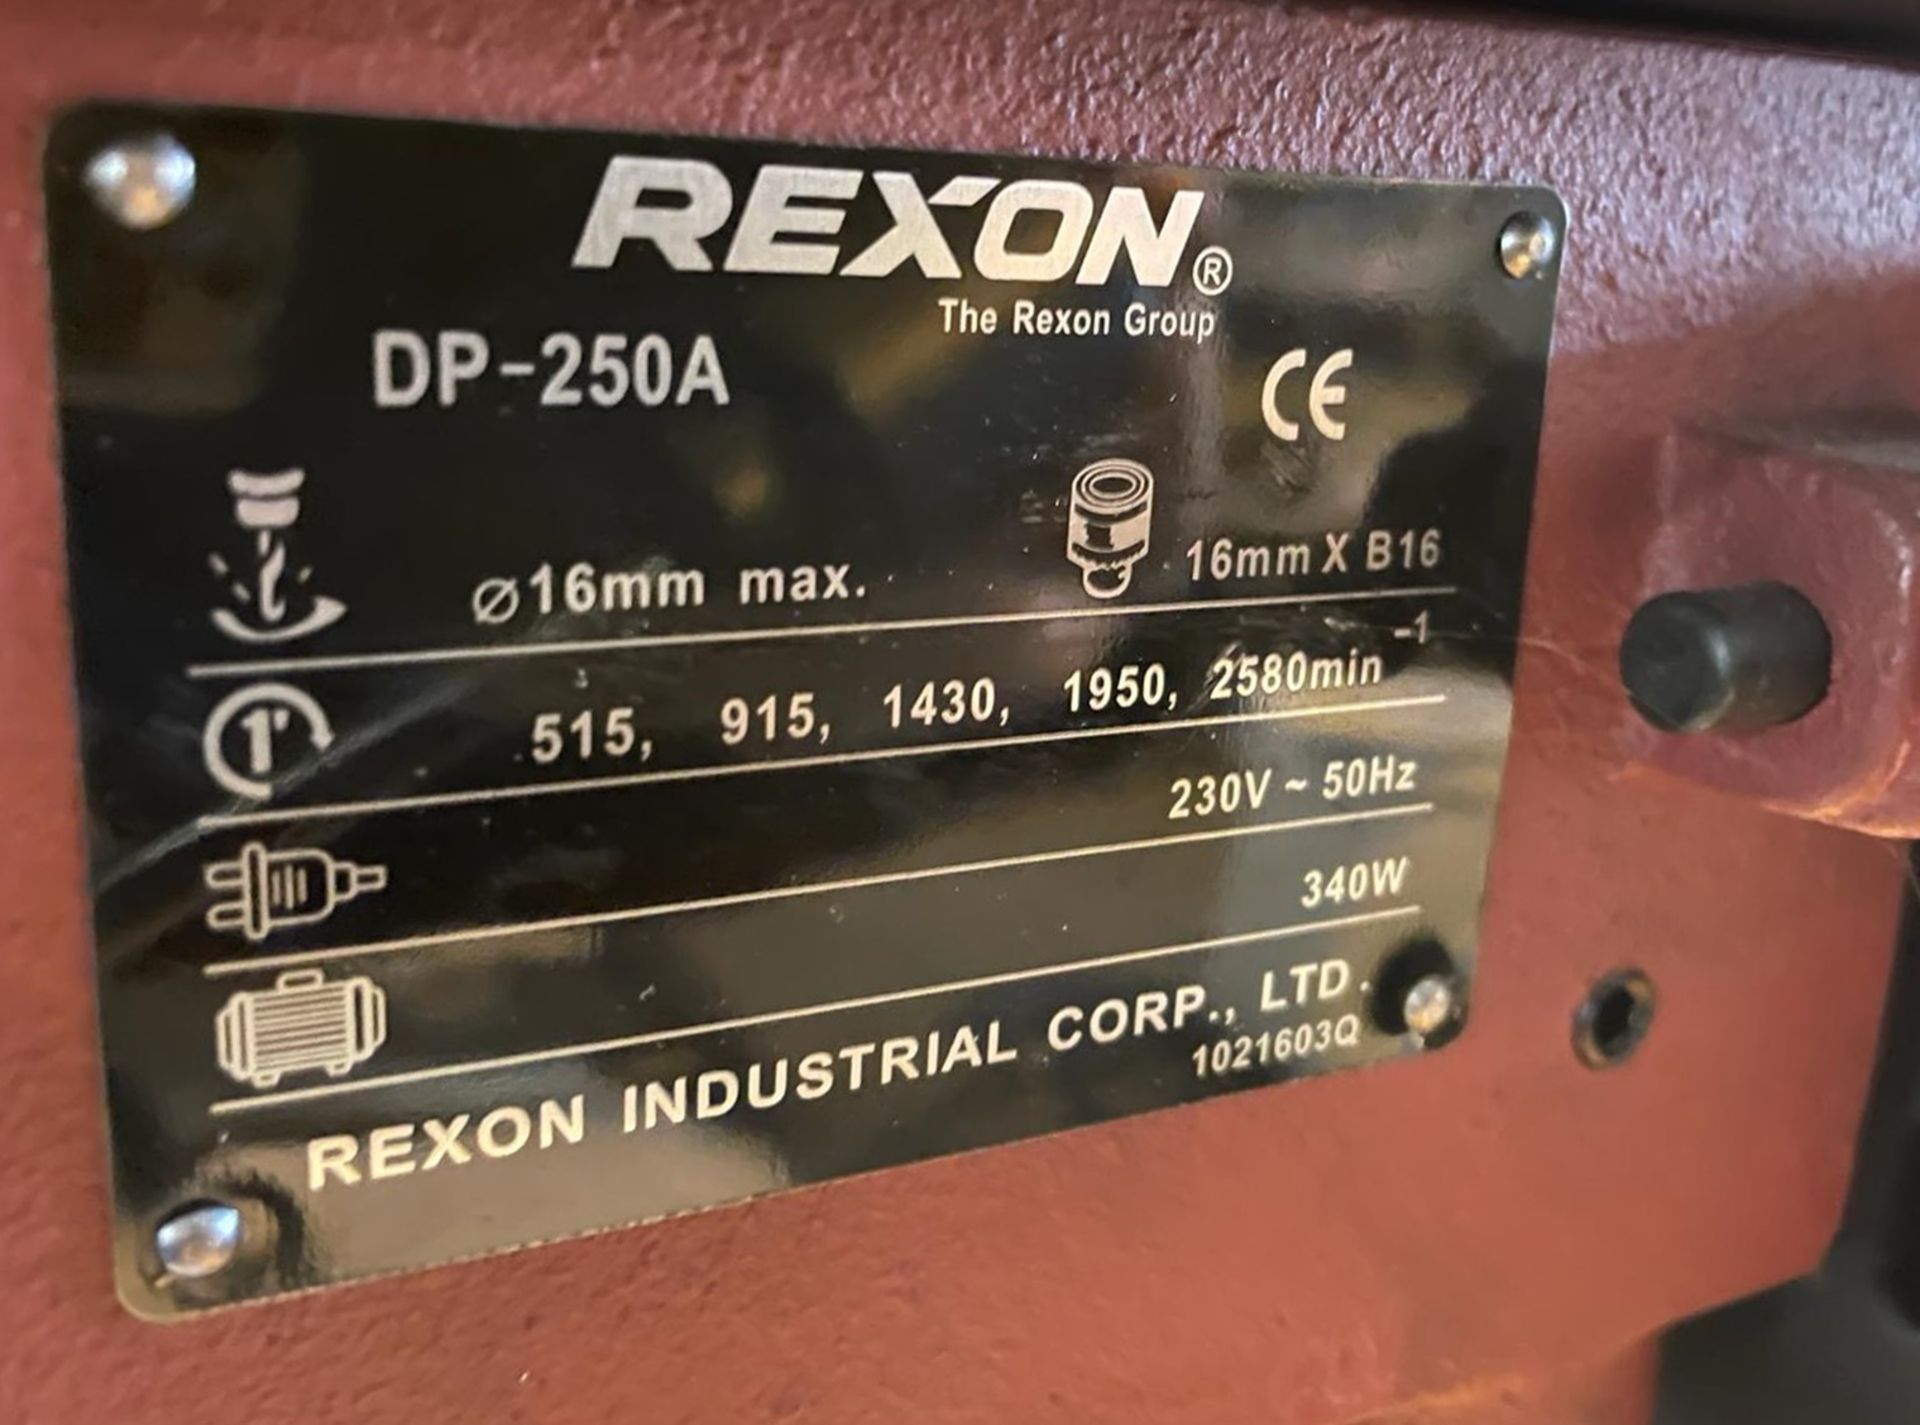 1 x Rexon DP-250A 5 Speed 240v Bench Drill - Image 7 of 8